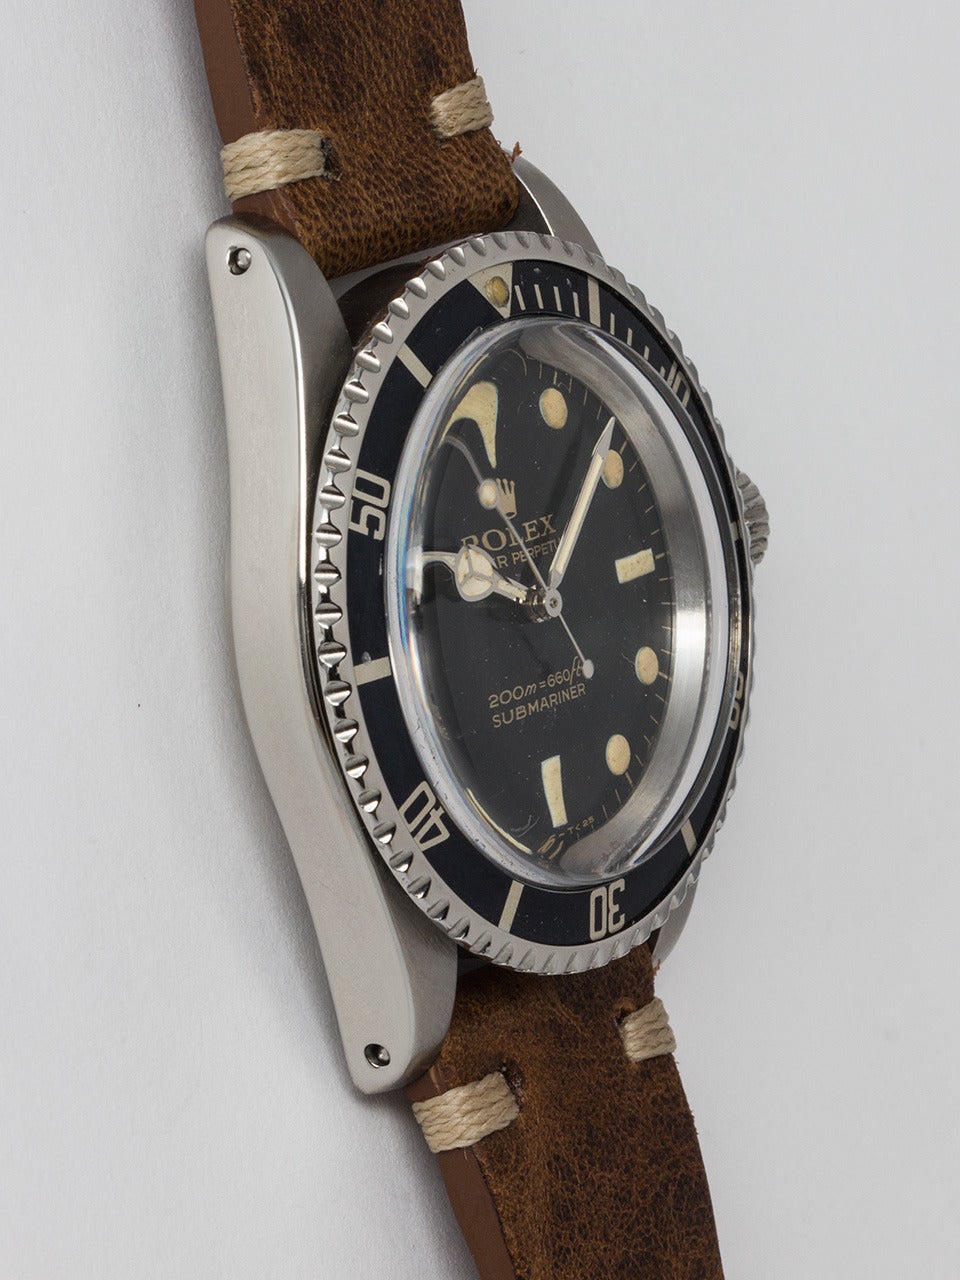 Rolex Stainless Steel Submariner ref 5513 serial # 1.4 million circa 1966. 40mm diameter Oyster case with faded time elapsed bezel and acrylic crystal. Great looking original glossy black gilt Swiss T<25 dial with original beautifully patina'd